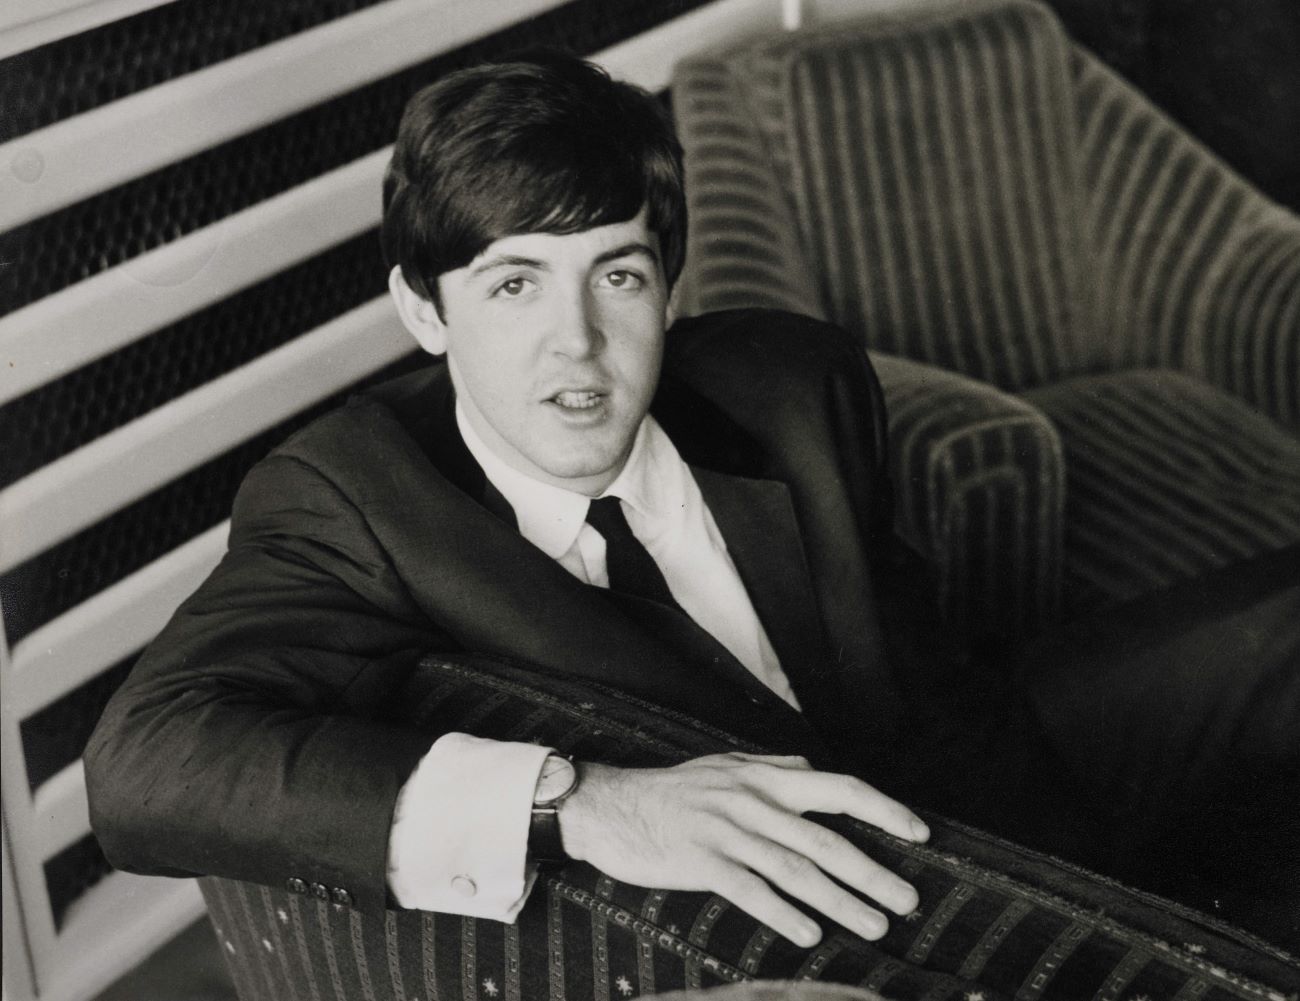 A black and white picture of Paul McCartney wearing a suit and sitting in a chair.